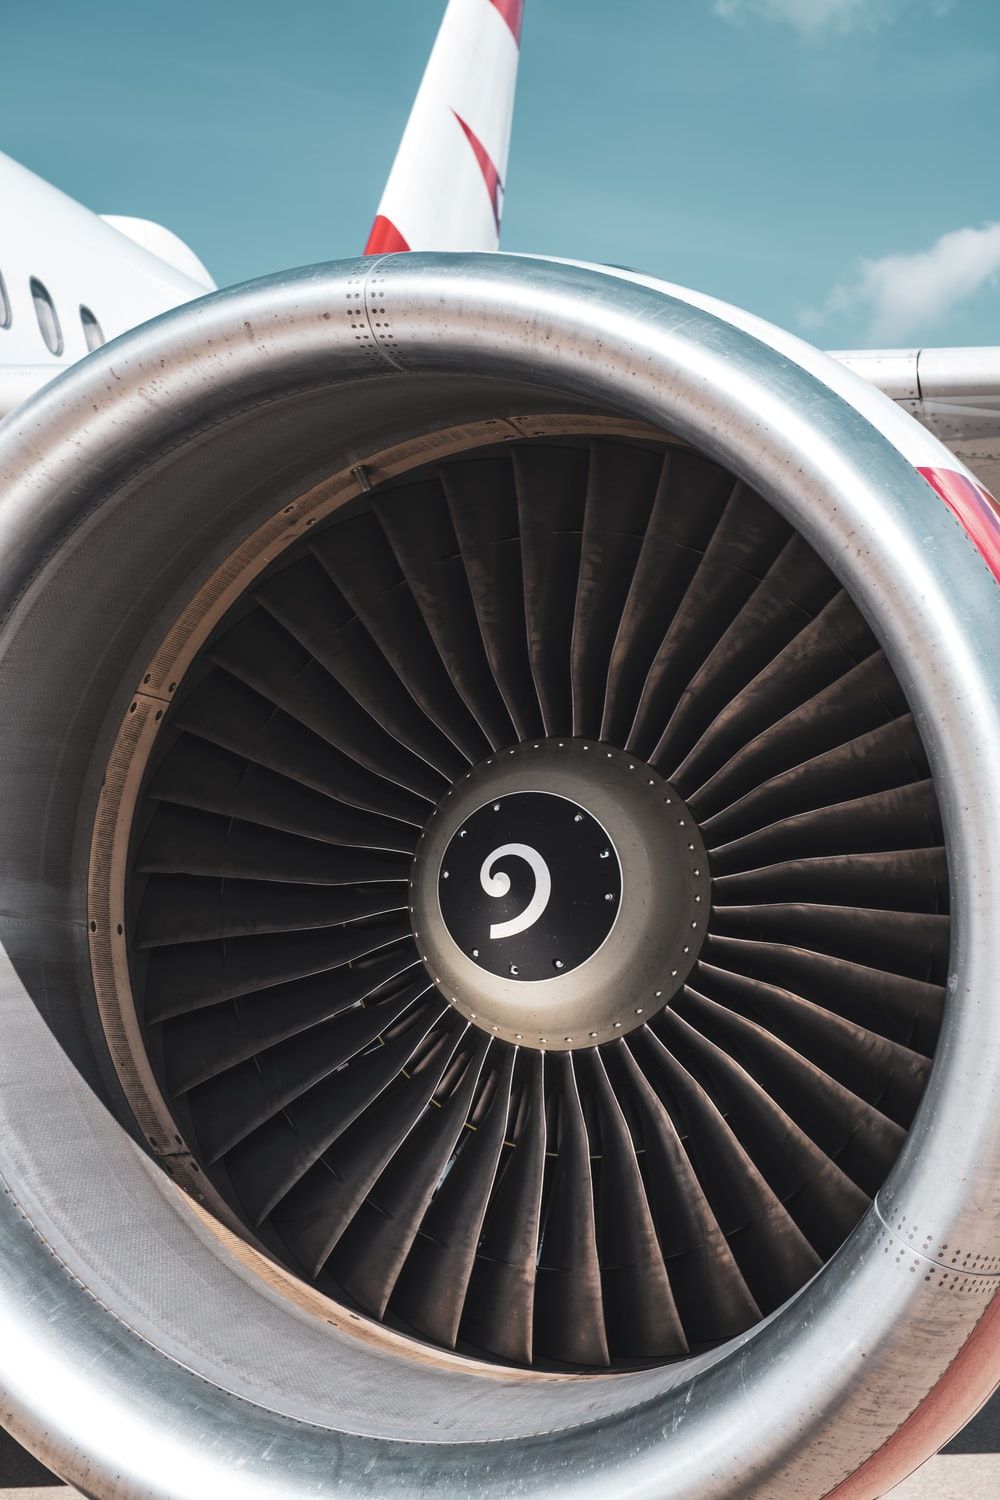 Jet Engine Picture. Download Free Image